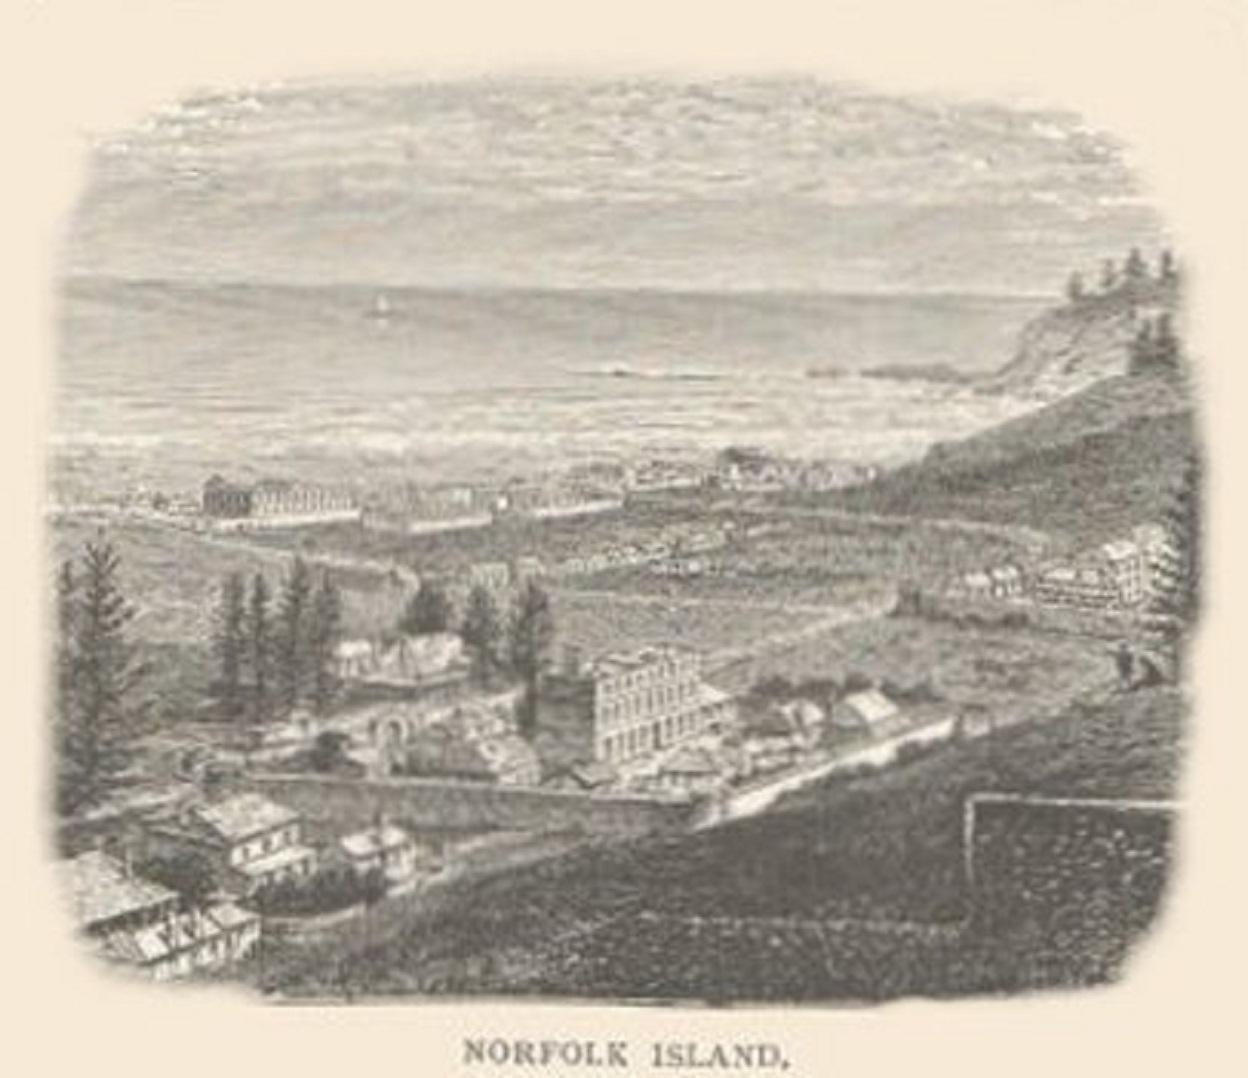 Aerial view of 19th-century Norfolk Island in Australia, with few structures and a sweeping landscape